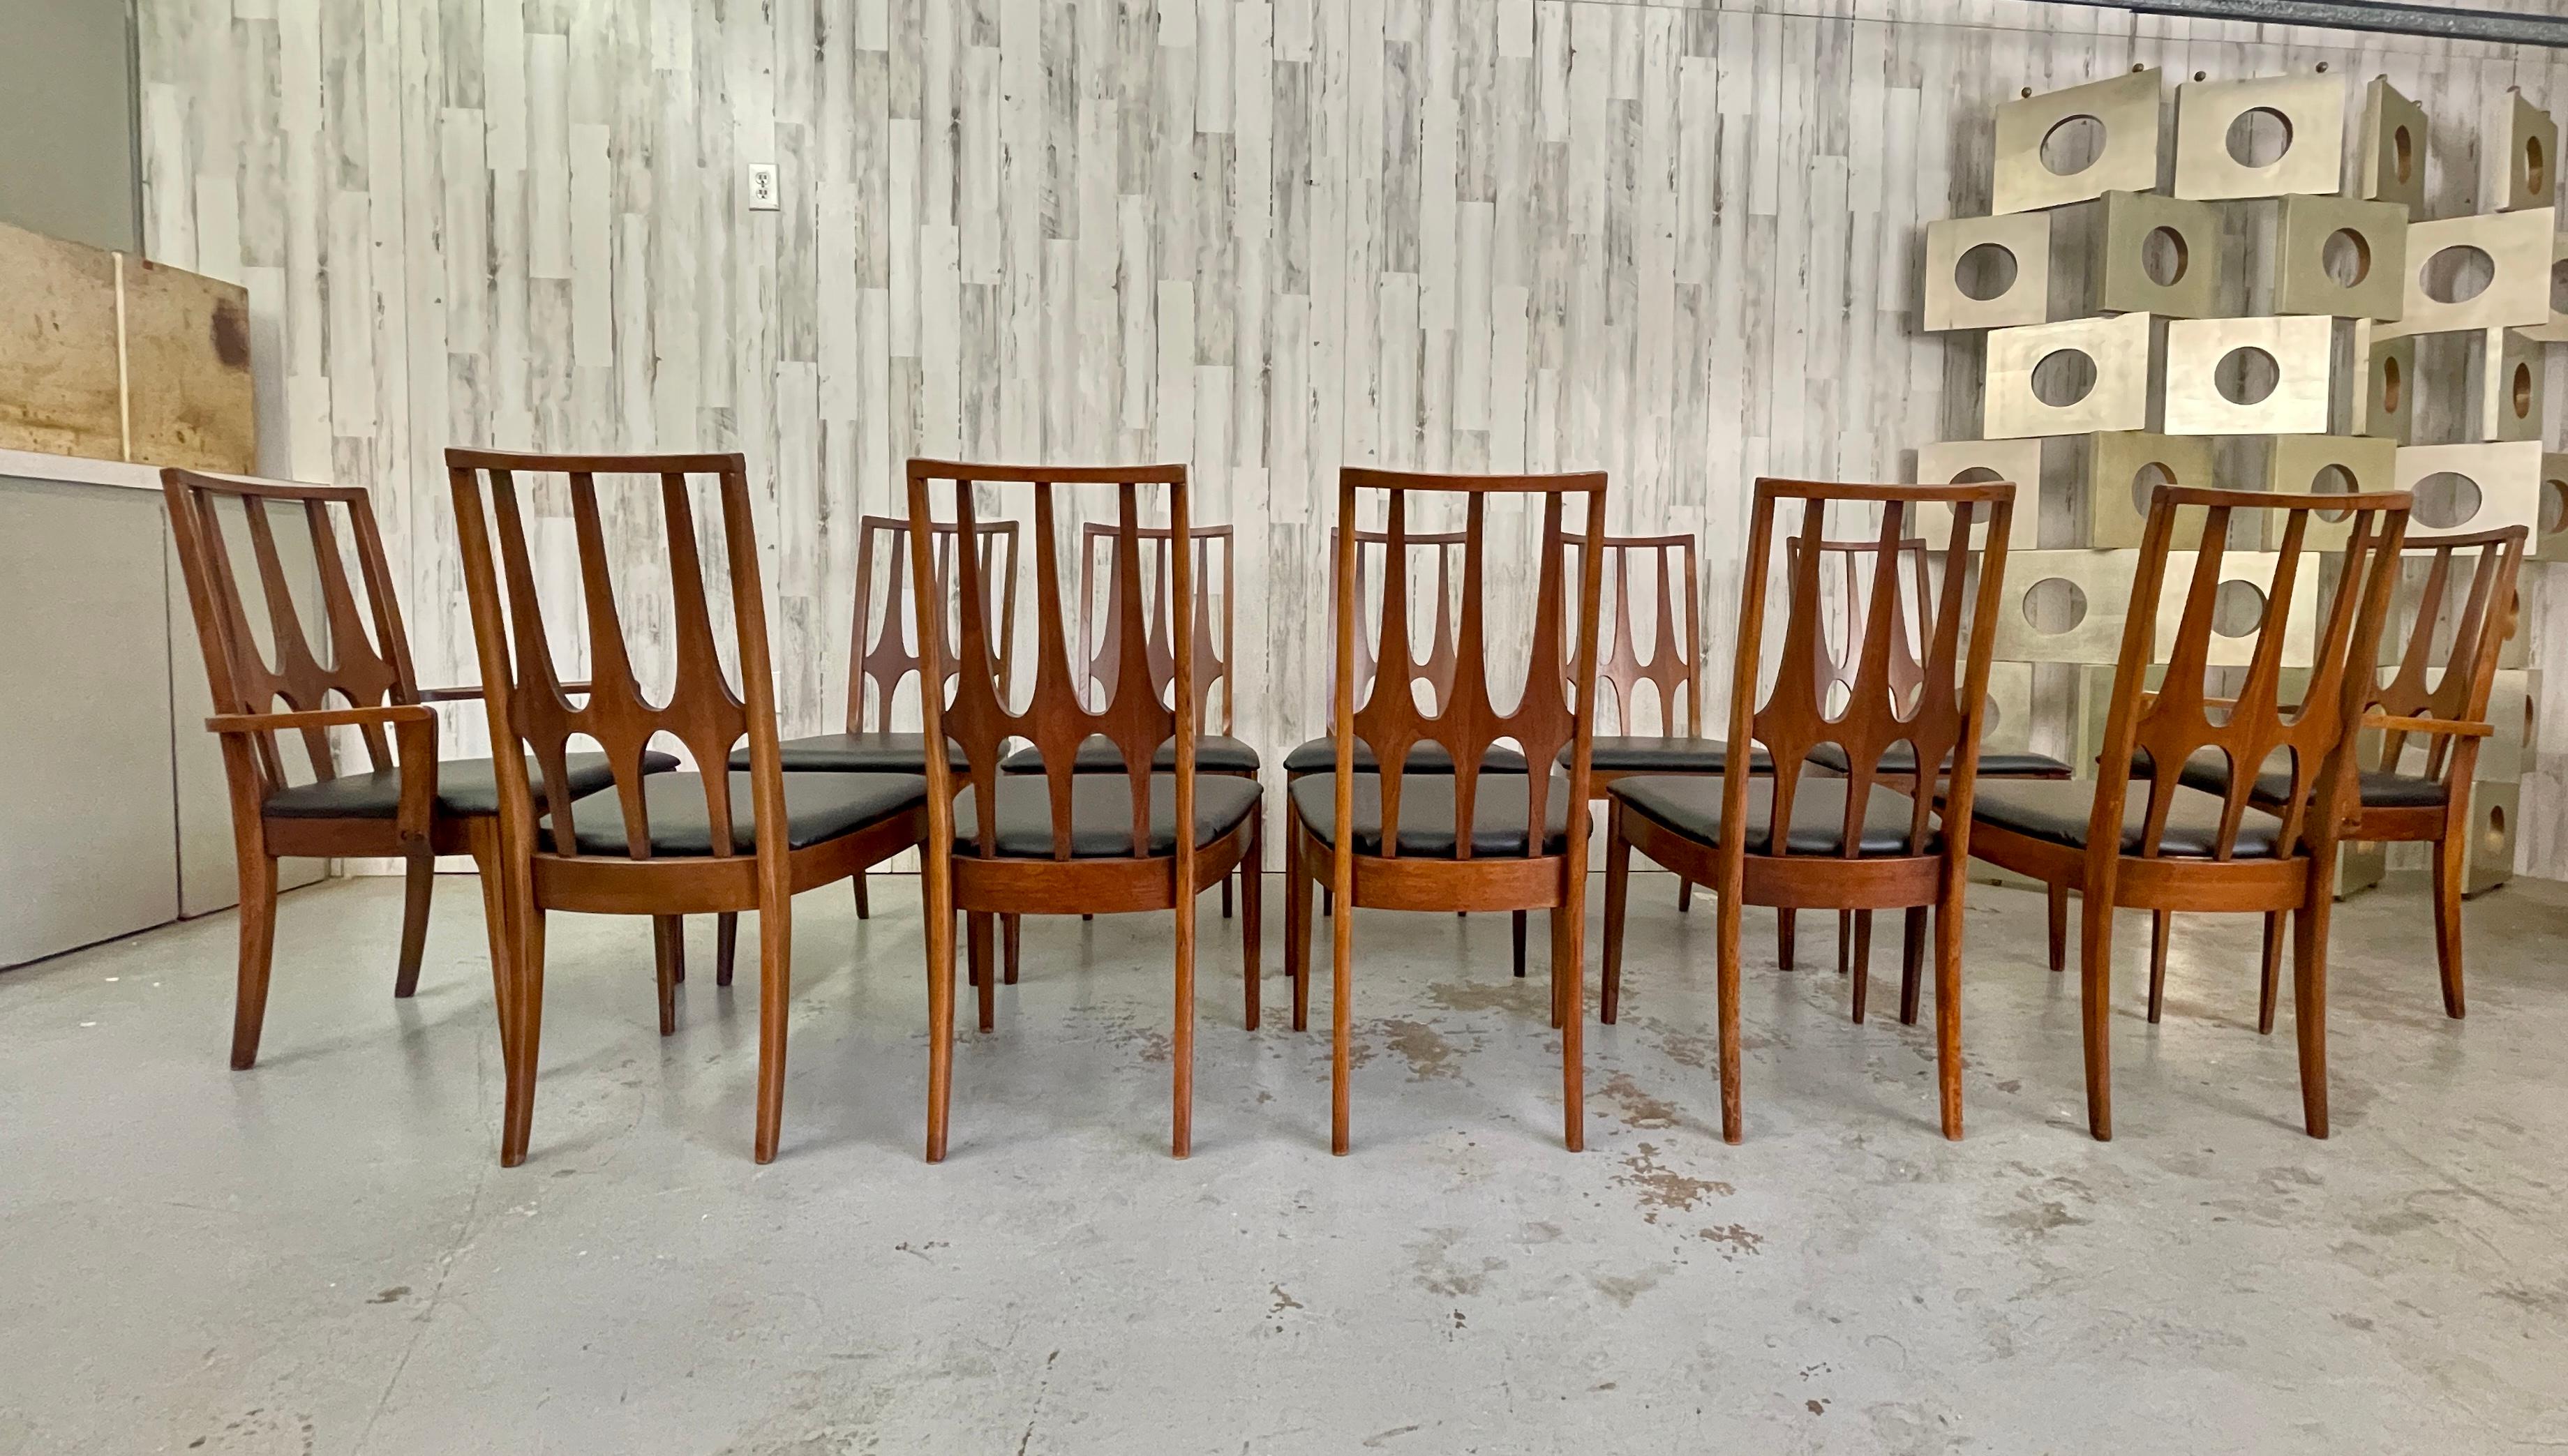 Broyhill Brasilia Dining Chairs- Set of 12 with a new black vinyl upholstery. 10 side chairs and 2 arm chairs. 
Arm Chairs measure: 21.38 W x 22.38 D x 37.63 H Seat: 18.38.